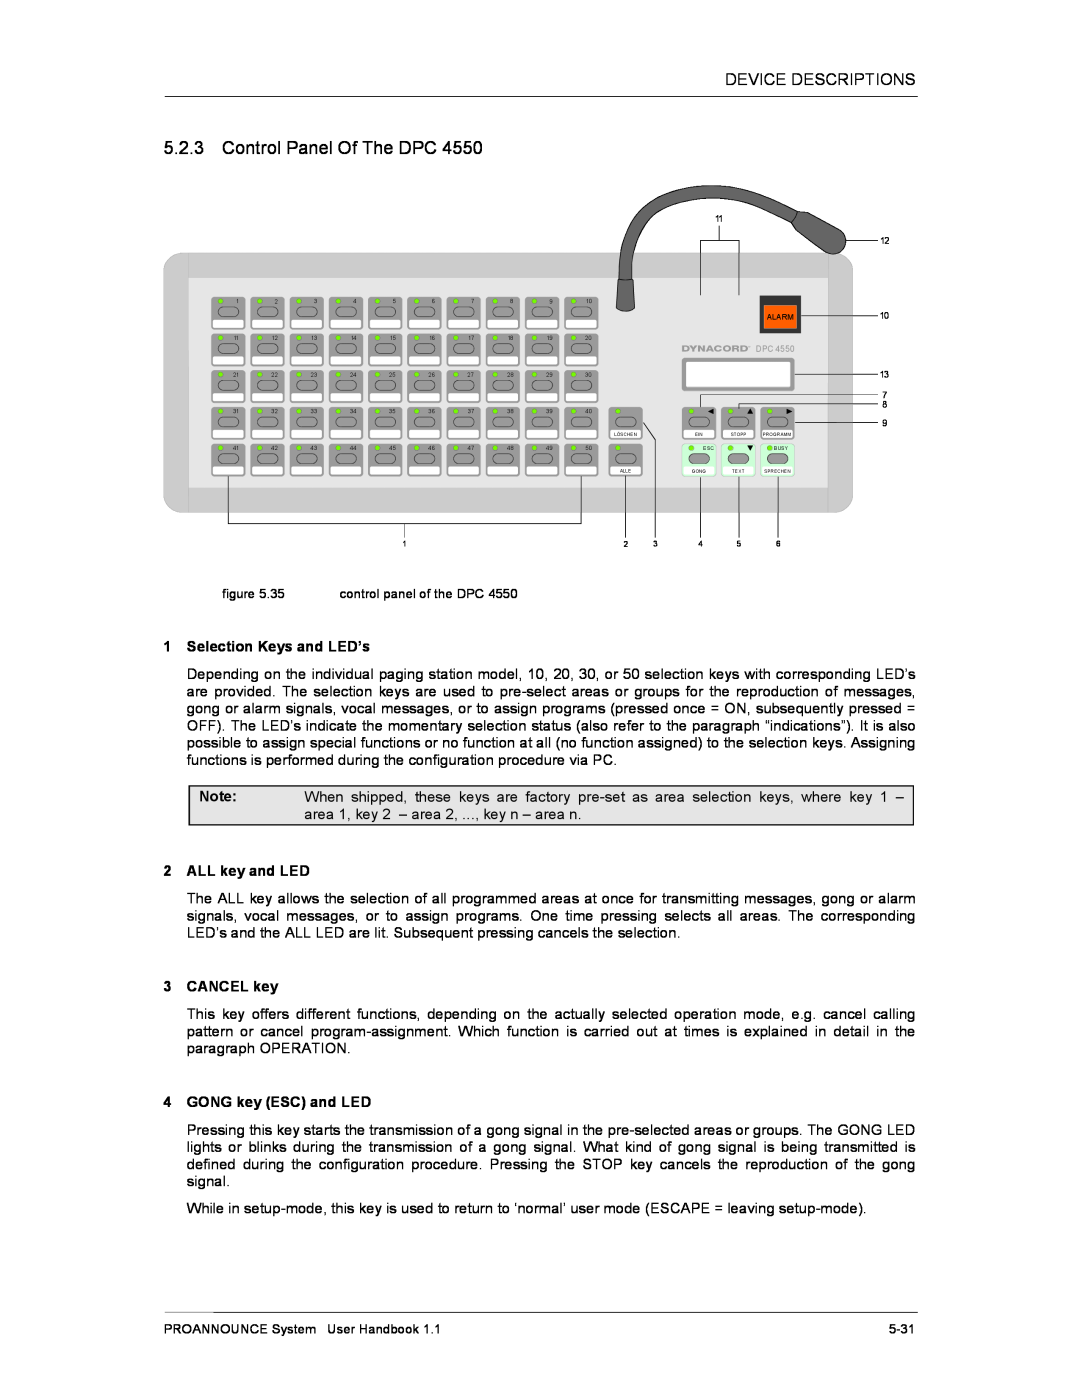 Dynacord DPM 4000 manual Control Panel Of The DPC, 1Selection Keys and LED’s, 2ALL key and LED, 3CANCEL key 